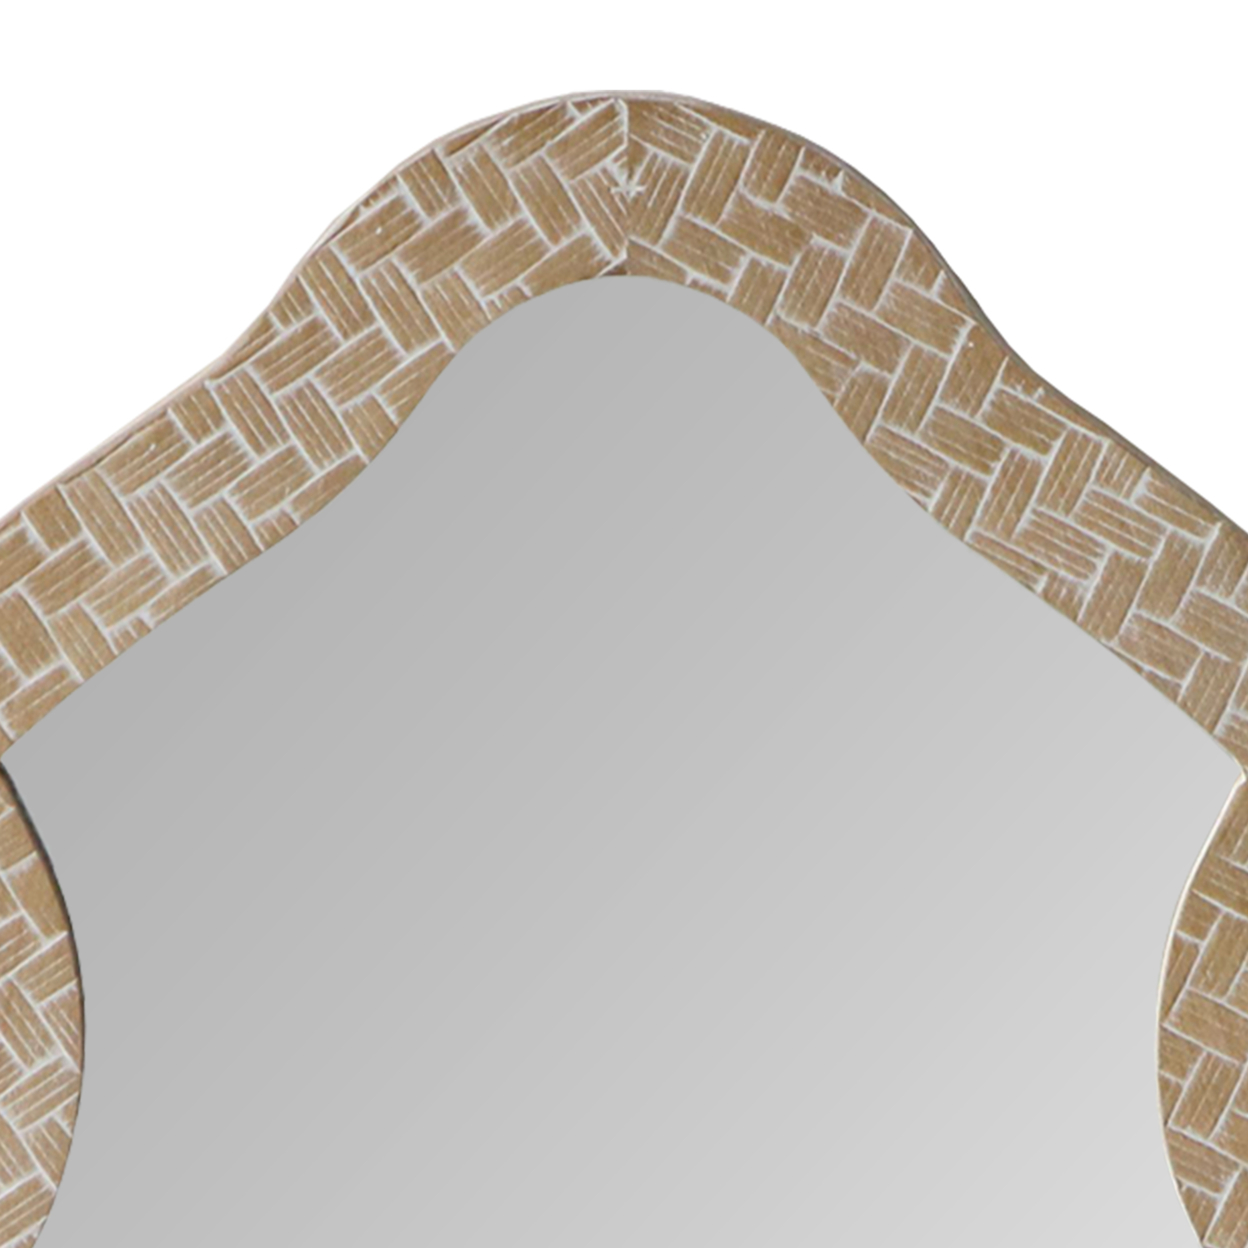 Scalloped Top Wooden Framed Wall Mirror With Geometric Texture, Brown- Saltoro Sherpi